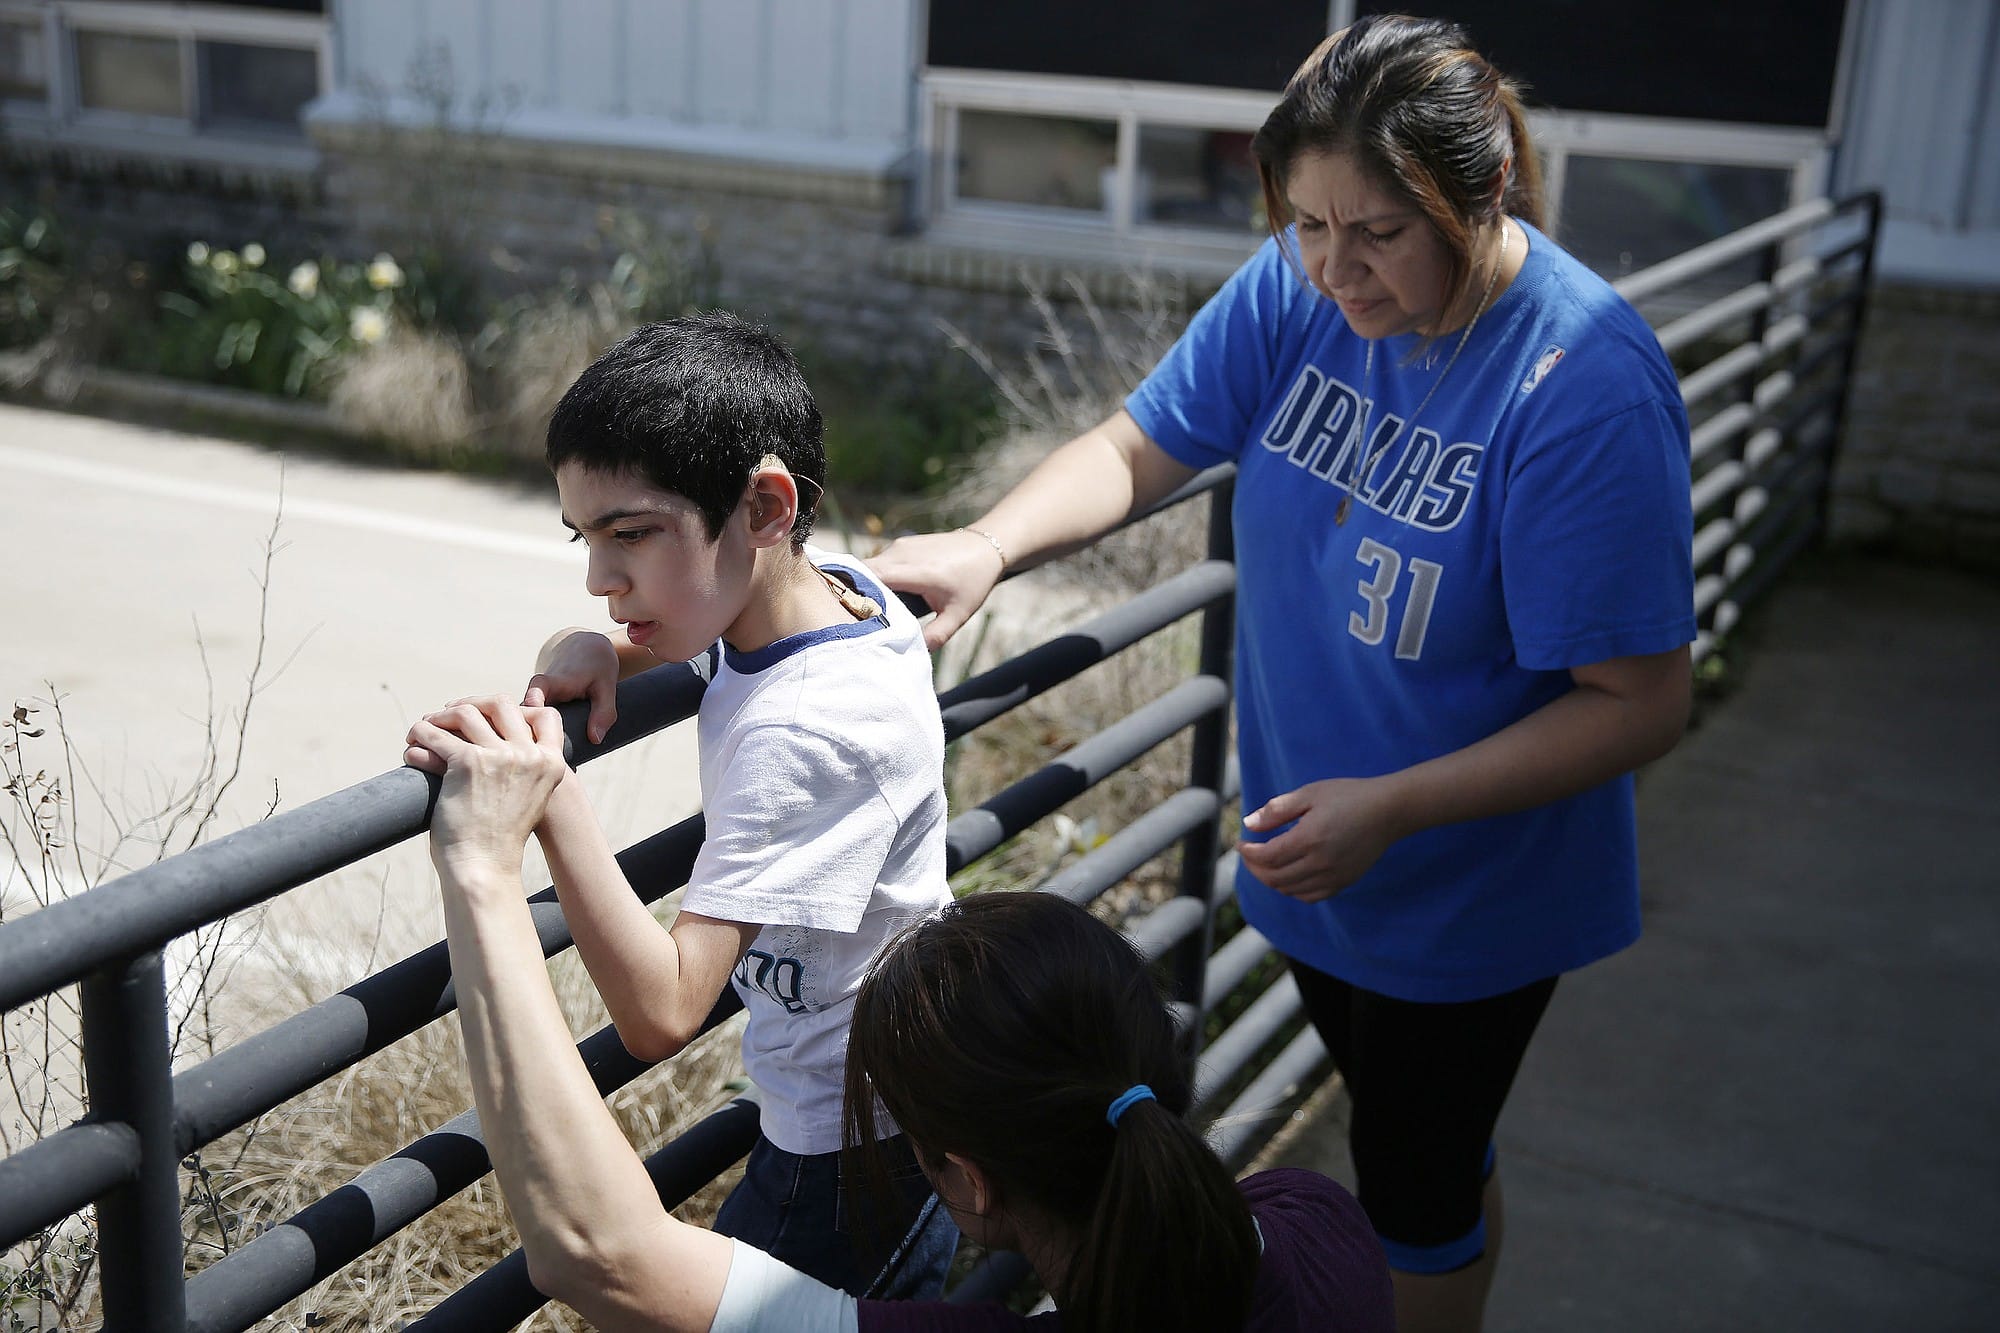 Laura Lopez, top right, watches as therapist Kristi Immitt helps her son, Jonathan Lopez, 7, of Rockwall, Texas, who has cerebral palsy, perform an exercise following his hippotherapy session at Equest on March 31, 2015 in Rowlett, Texas. Lopez has been attending Equest for one year.